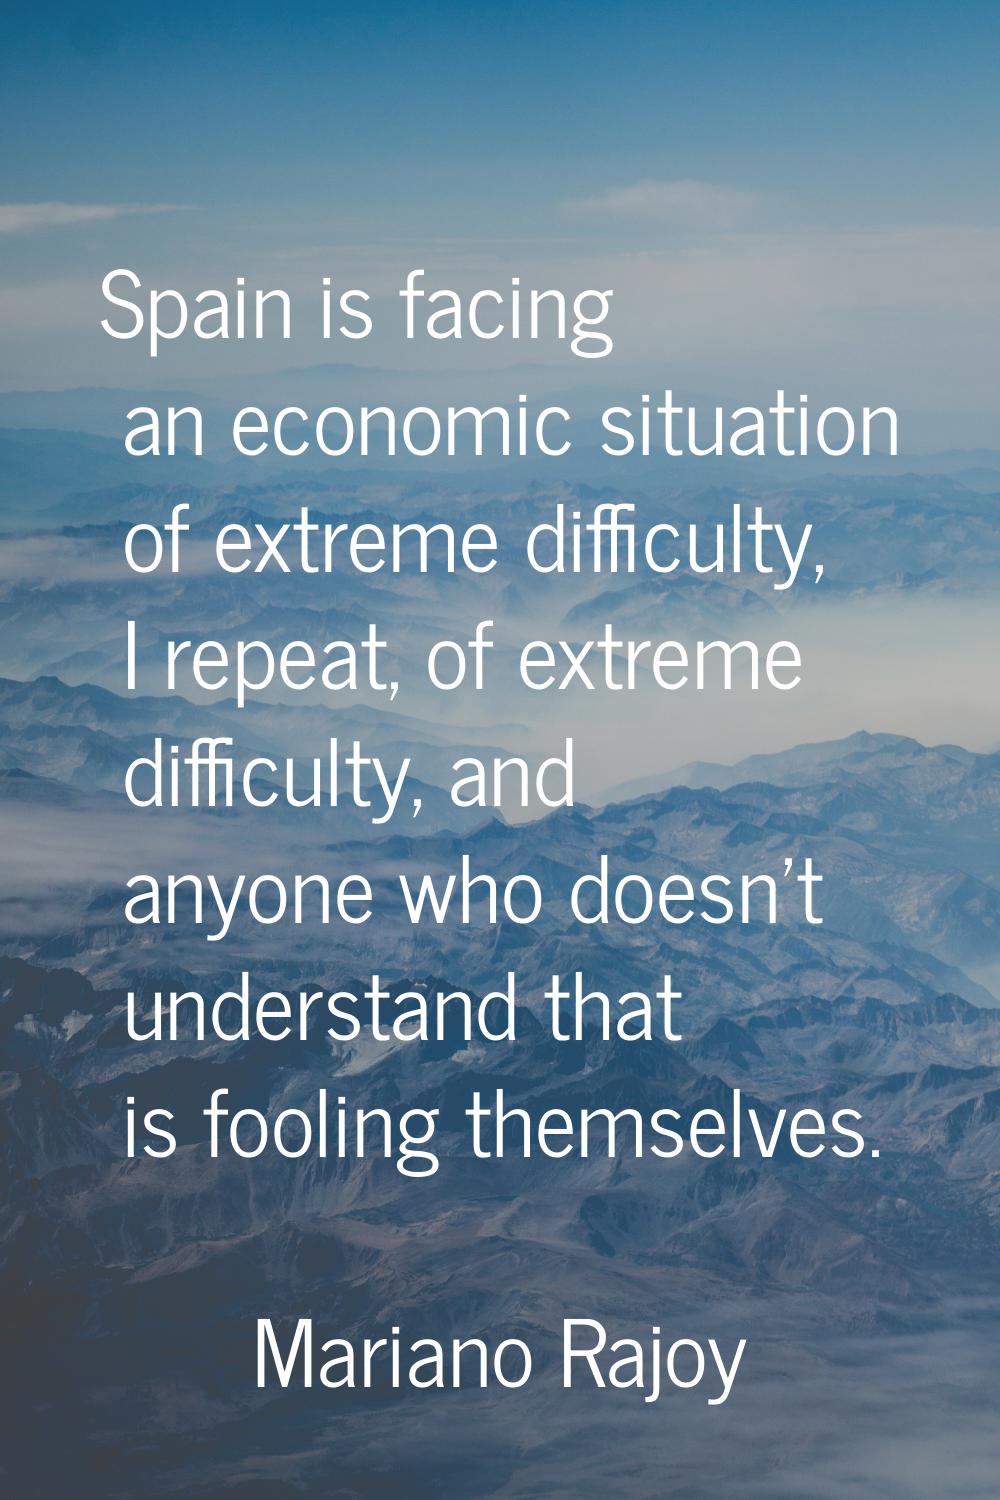 Spain is facing an economic situation of extreme difficulty, I repeat, of extreme difficulty, and a